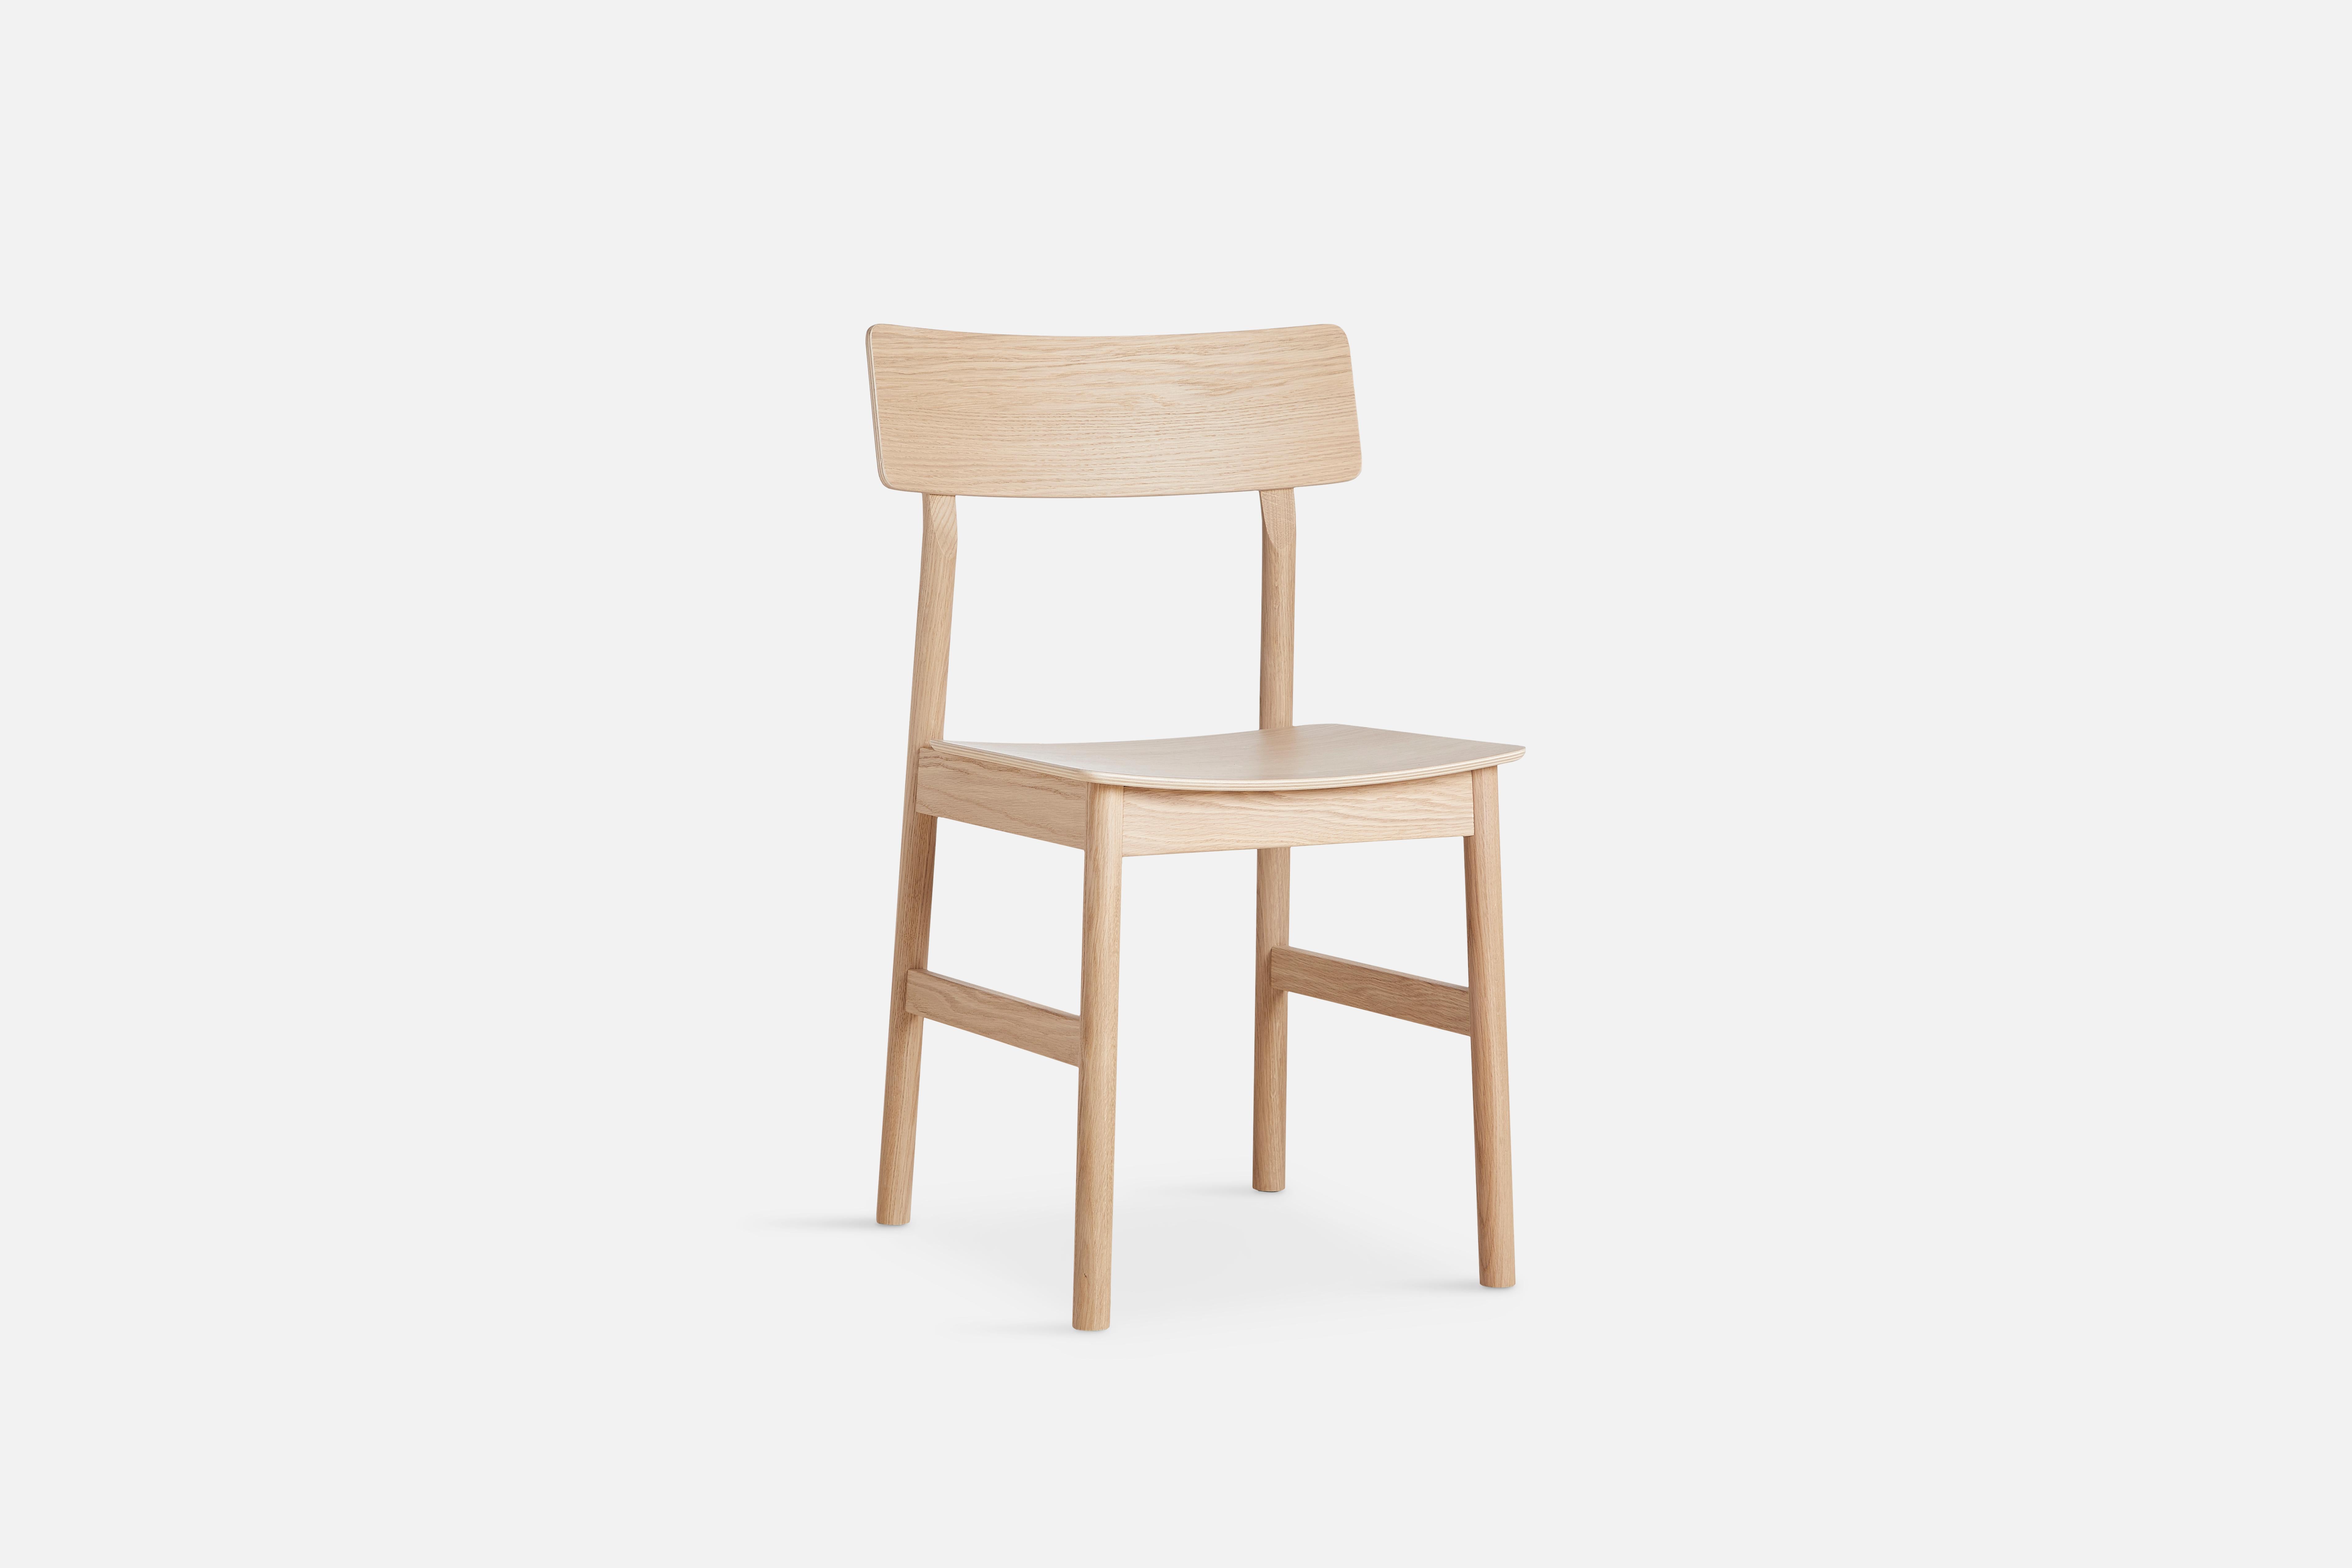 Pause white dining chair 2.0 by Kasper Nyman
Materials: Solid Oak, Plywood
Dimensions: D 47 x W 48 x H 80 cm
Also available in different colours and finishes.

The founders, Mia and Torben Koed, decided to put their 30 years of experience into